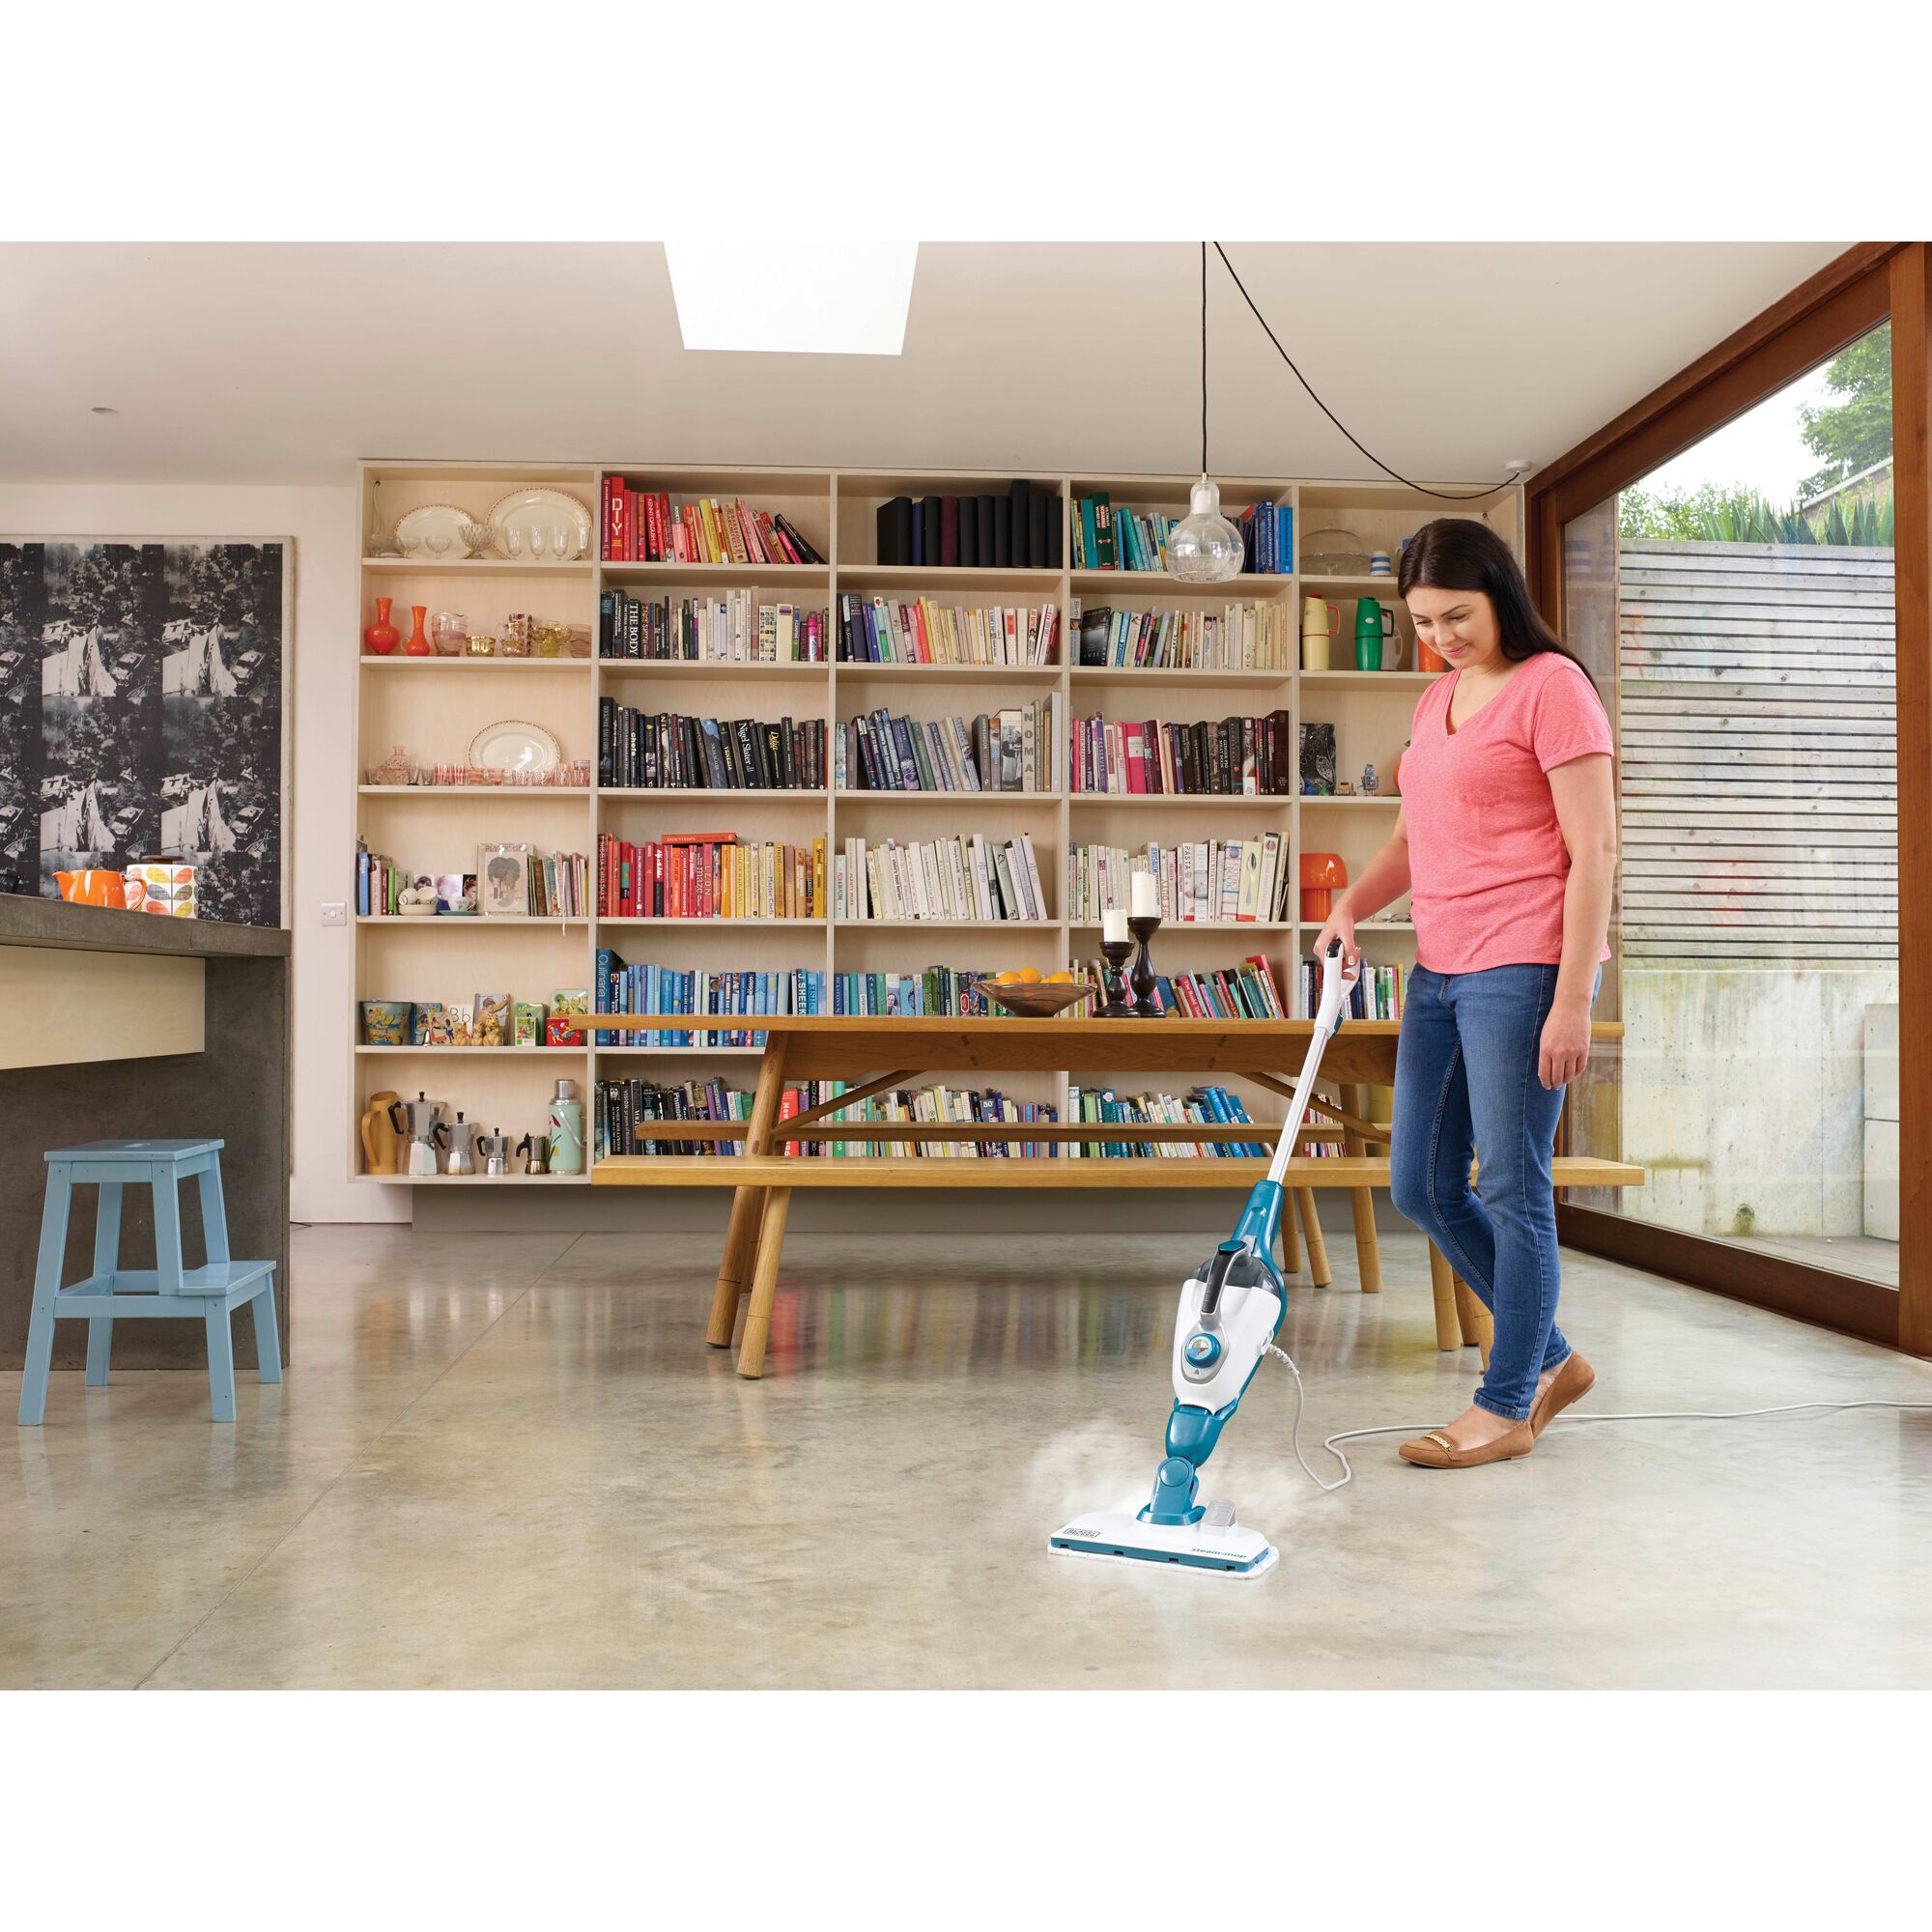 5 in 1 steammop and portable steamer being used by a person to clean floor.